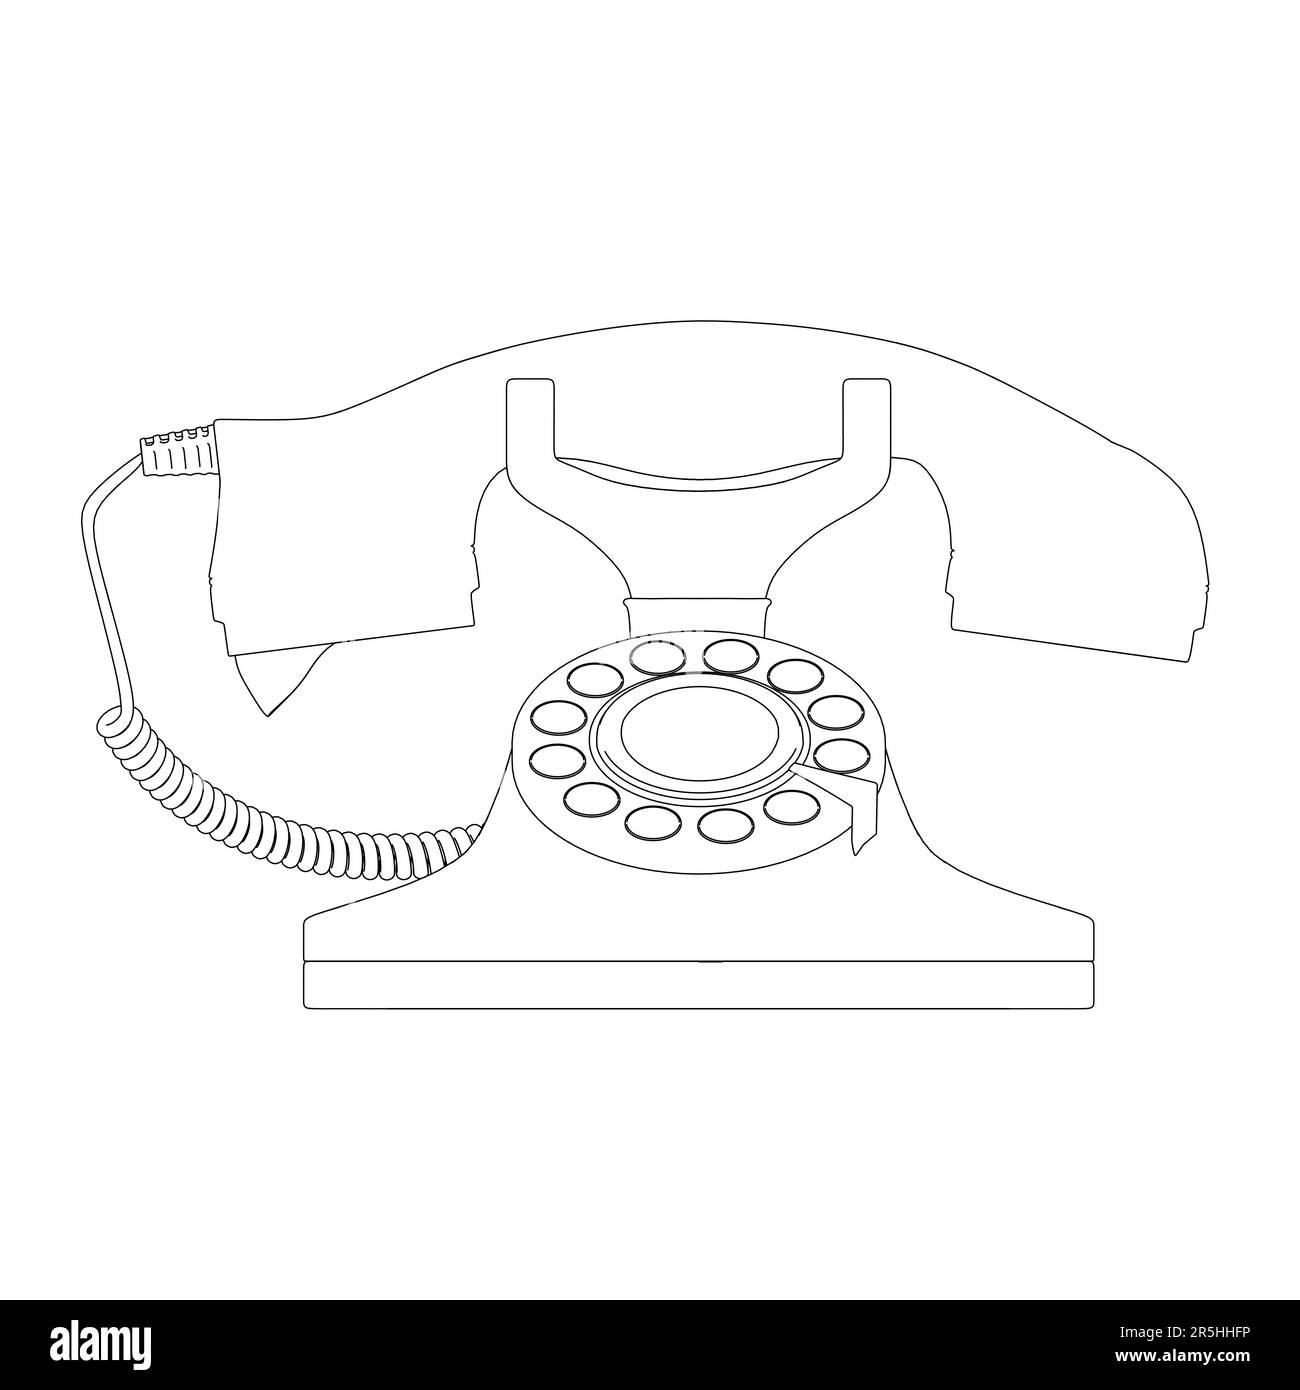 Outline of vintage home wire telephone of black lines isolated on white background. Front view. Vector illustration. Stock Vector